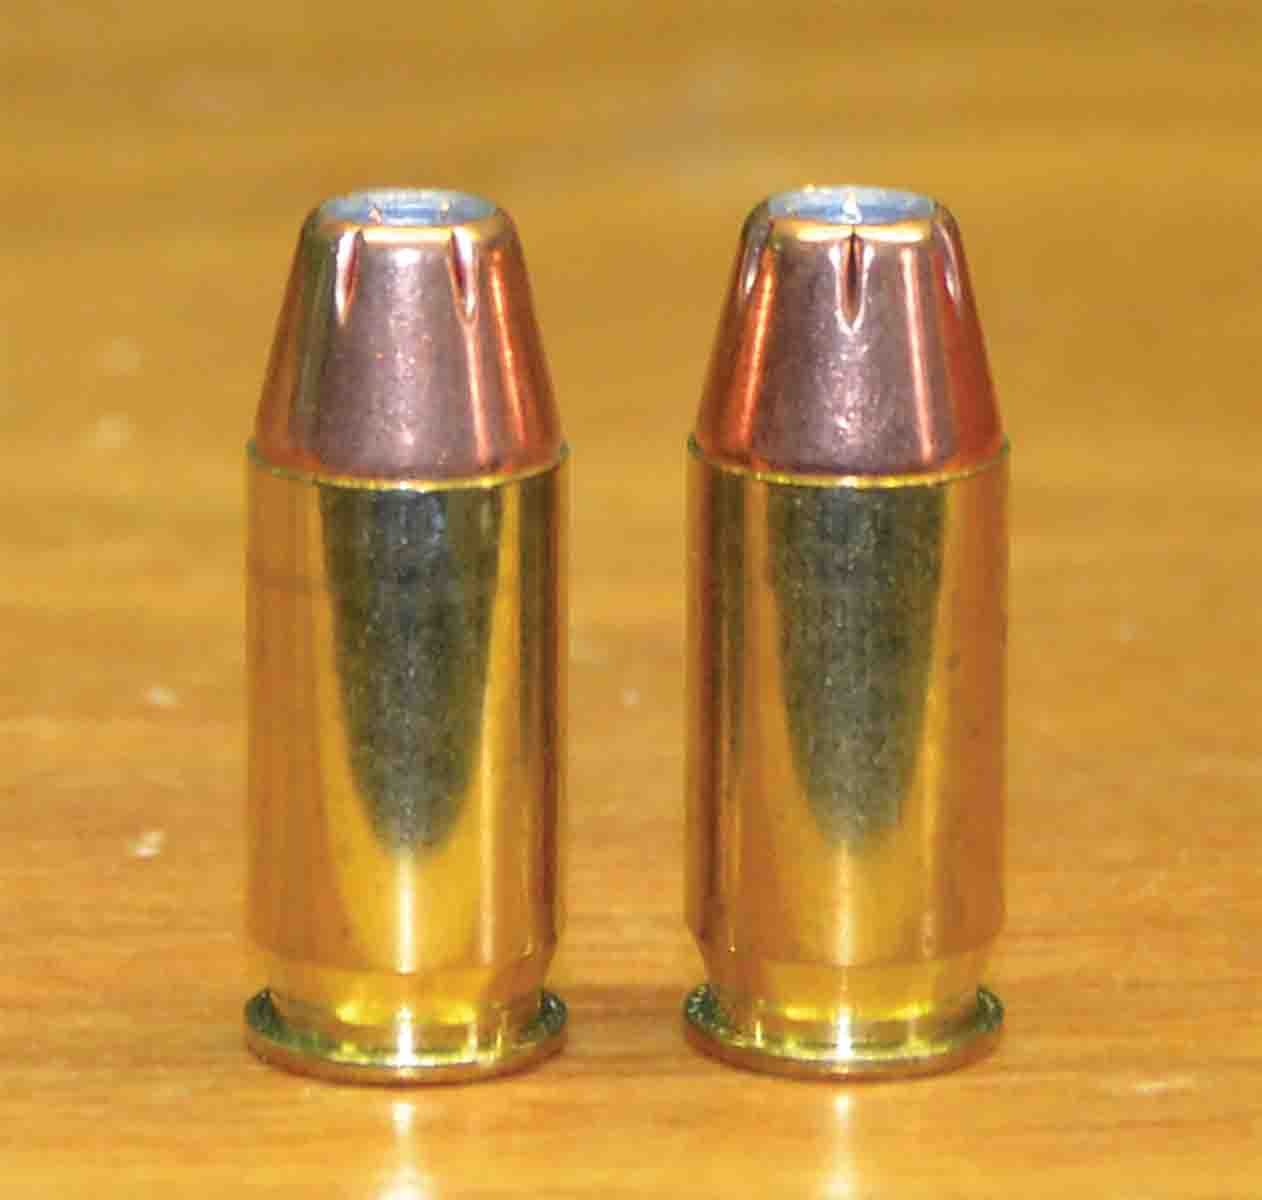 When the .45 Super (left) and the .45 ACP (right) are loaded with the same bullet, in this case, the Hornady 200-grain XTP, they look the same because externally they are the same. Only looking at their headstamps will reveal which is which. Accidentally filling a .45 ACP case with a .45 Super load would not be good and keeping them separate in the loading room and at the range is extremely important.